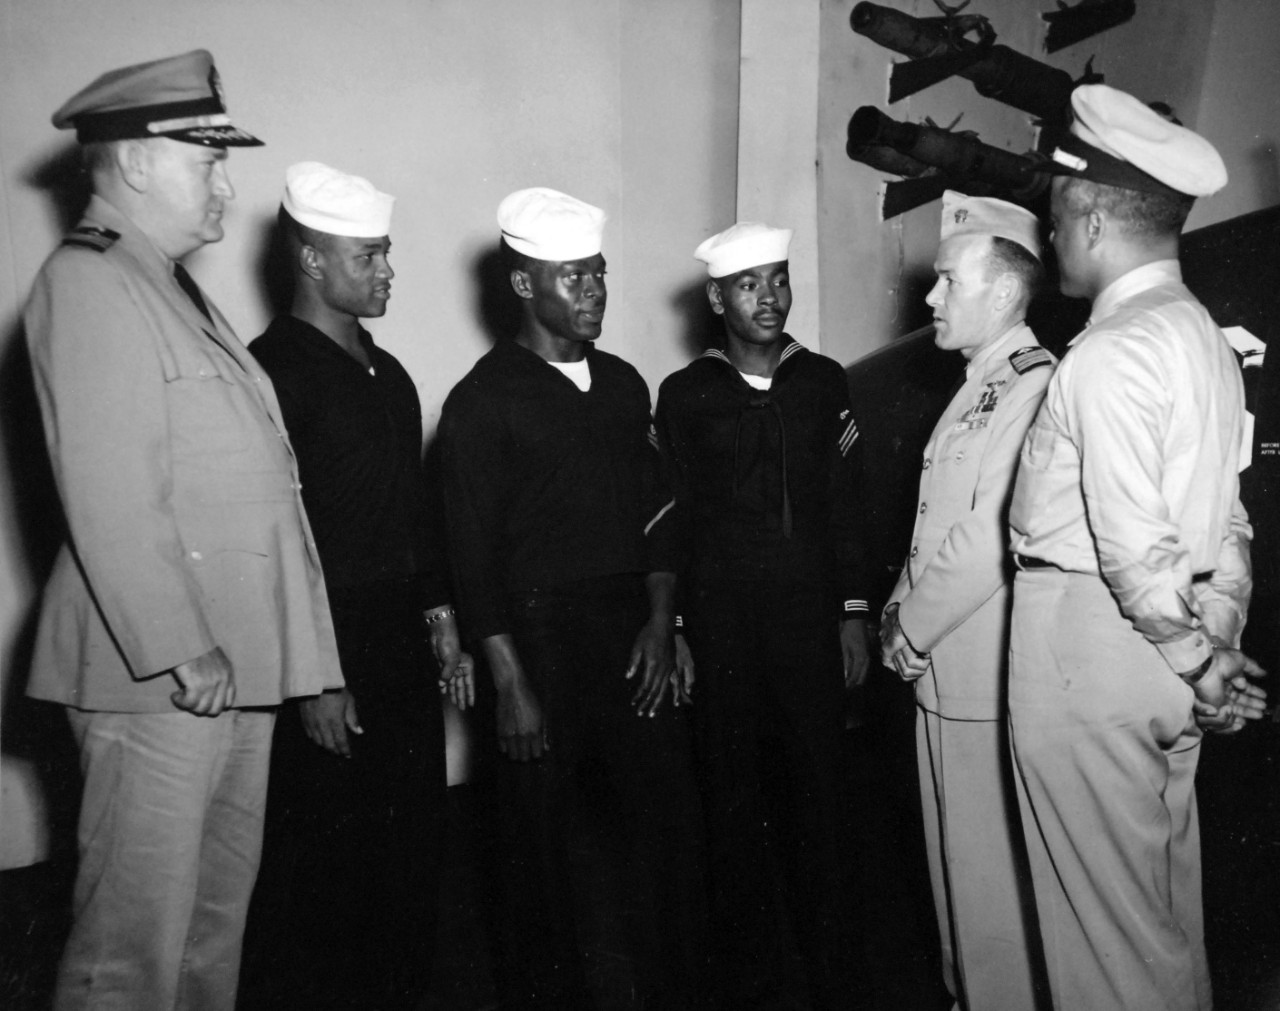 80-G-413551:   USS Midway (CVA-41), October 5, 1949.   U.S. Naval Officers and men, (left to right):  Commander T. H. Reilly, ChC; RD3 J.E. Dulaney; BM2 J.J. Pratt; ABAN F.A. Epps; Captain J.H. Flatley; and Lieutenant Dennis D. Nelson.   Nelson was one of the Golden Thirteen.  Official U.S. Navy Photograph, now in the collections of the National Archives.  